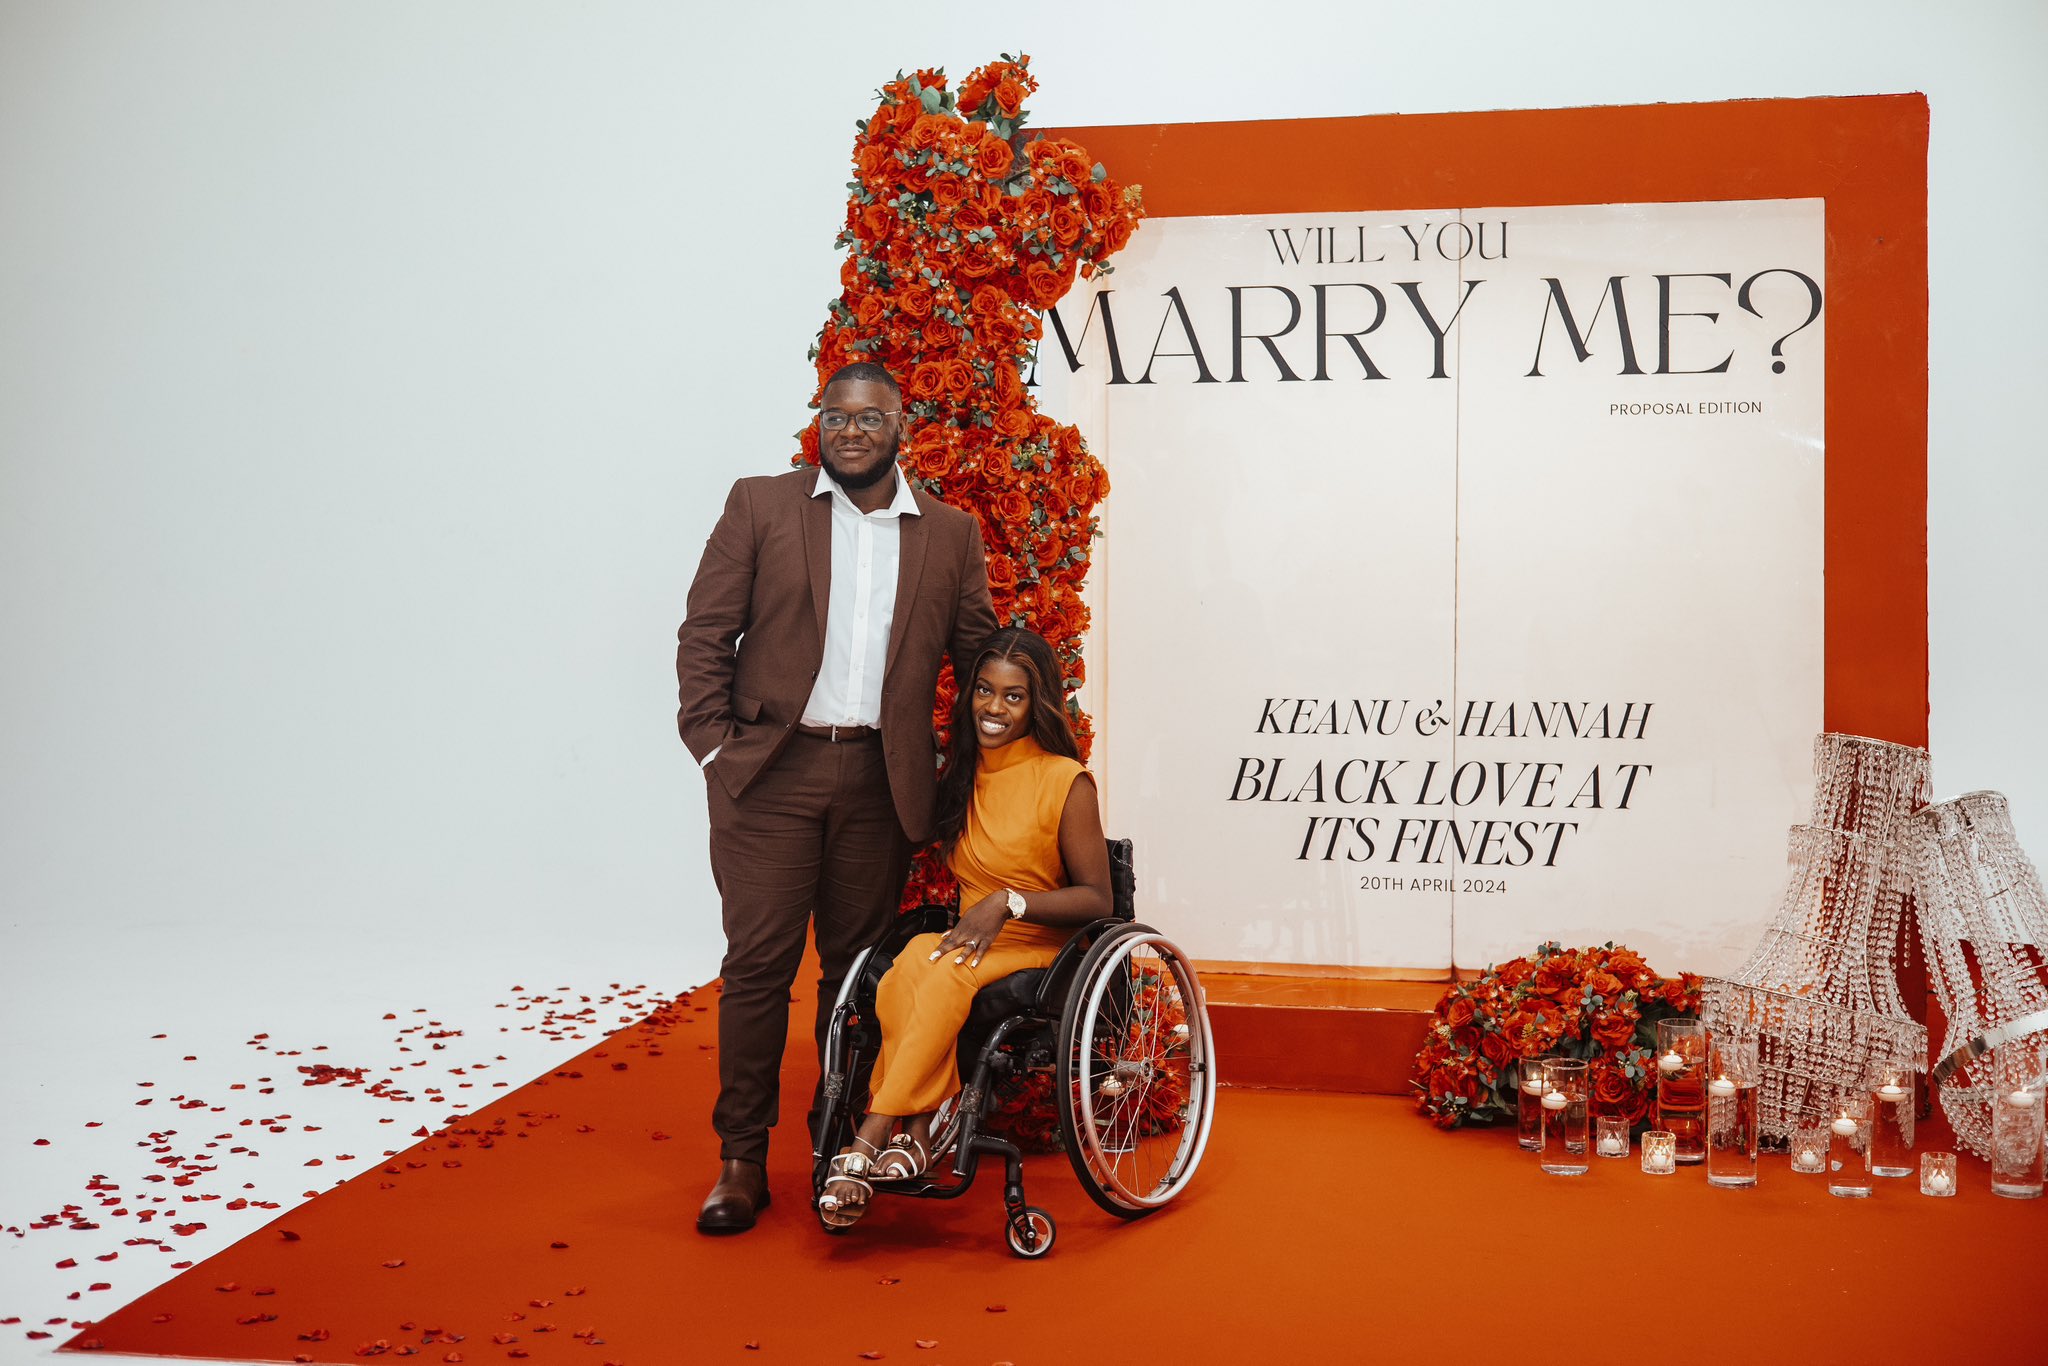 Beautiful moment man kneels to propose to his wheelchair-bound girlfriend